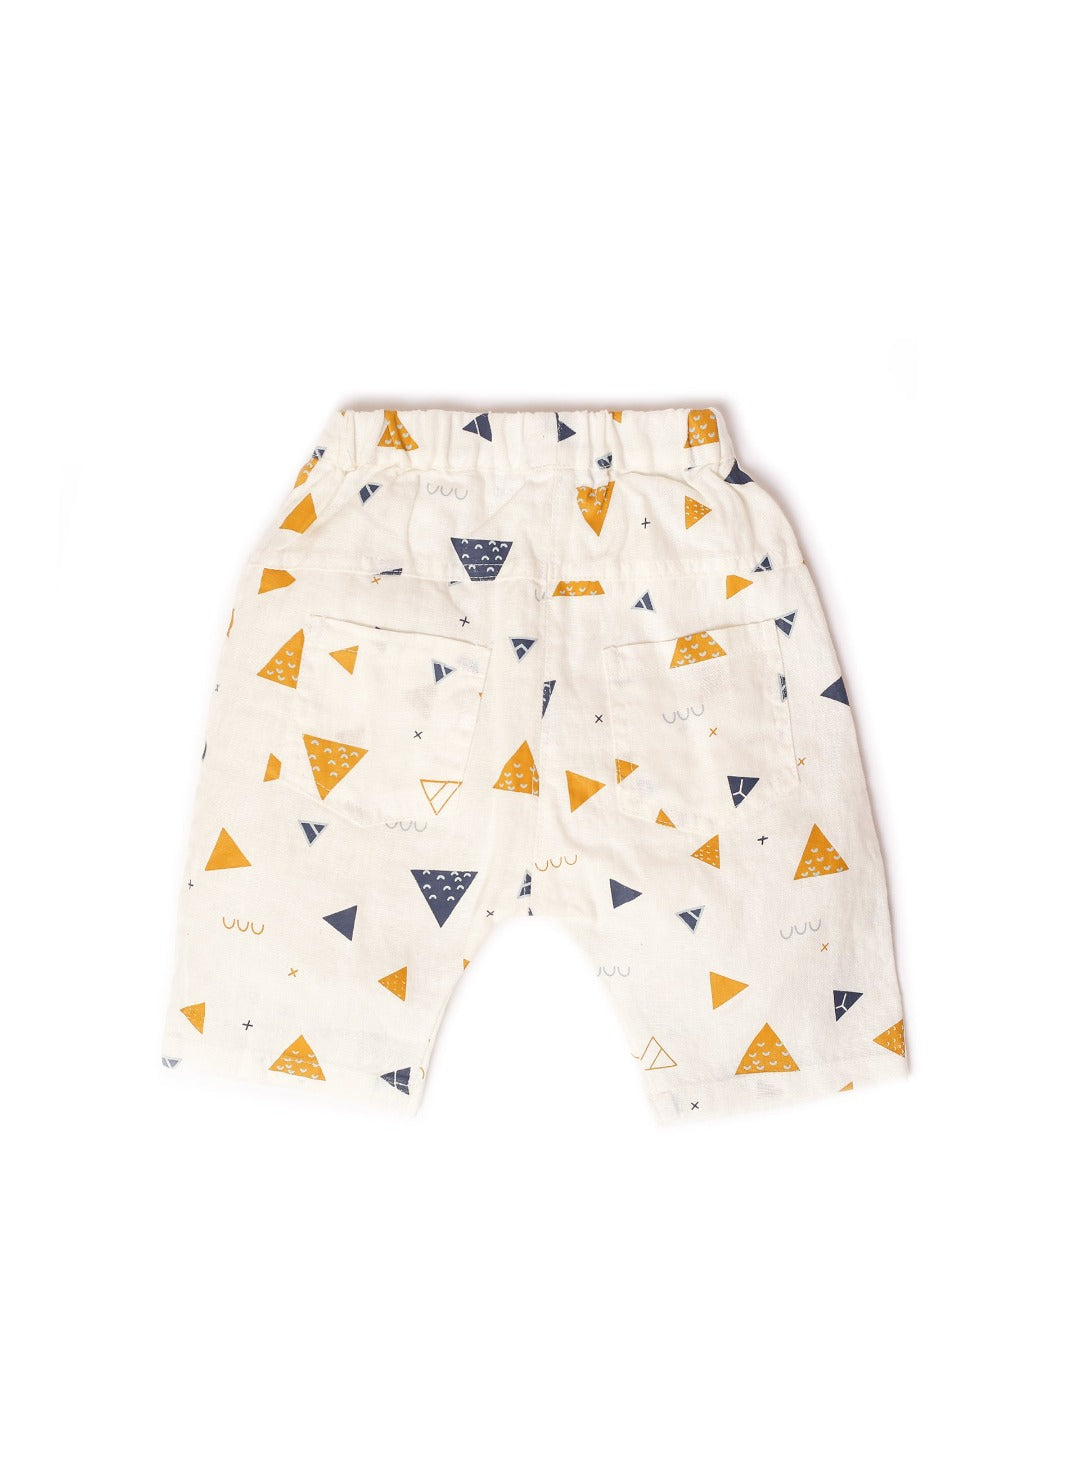 vivid white shorts with triangle prints